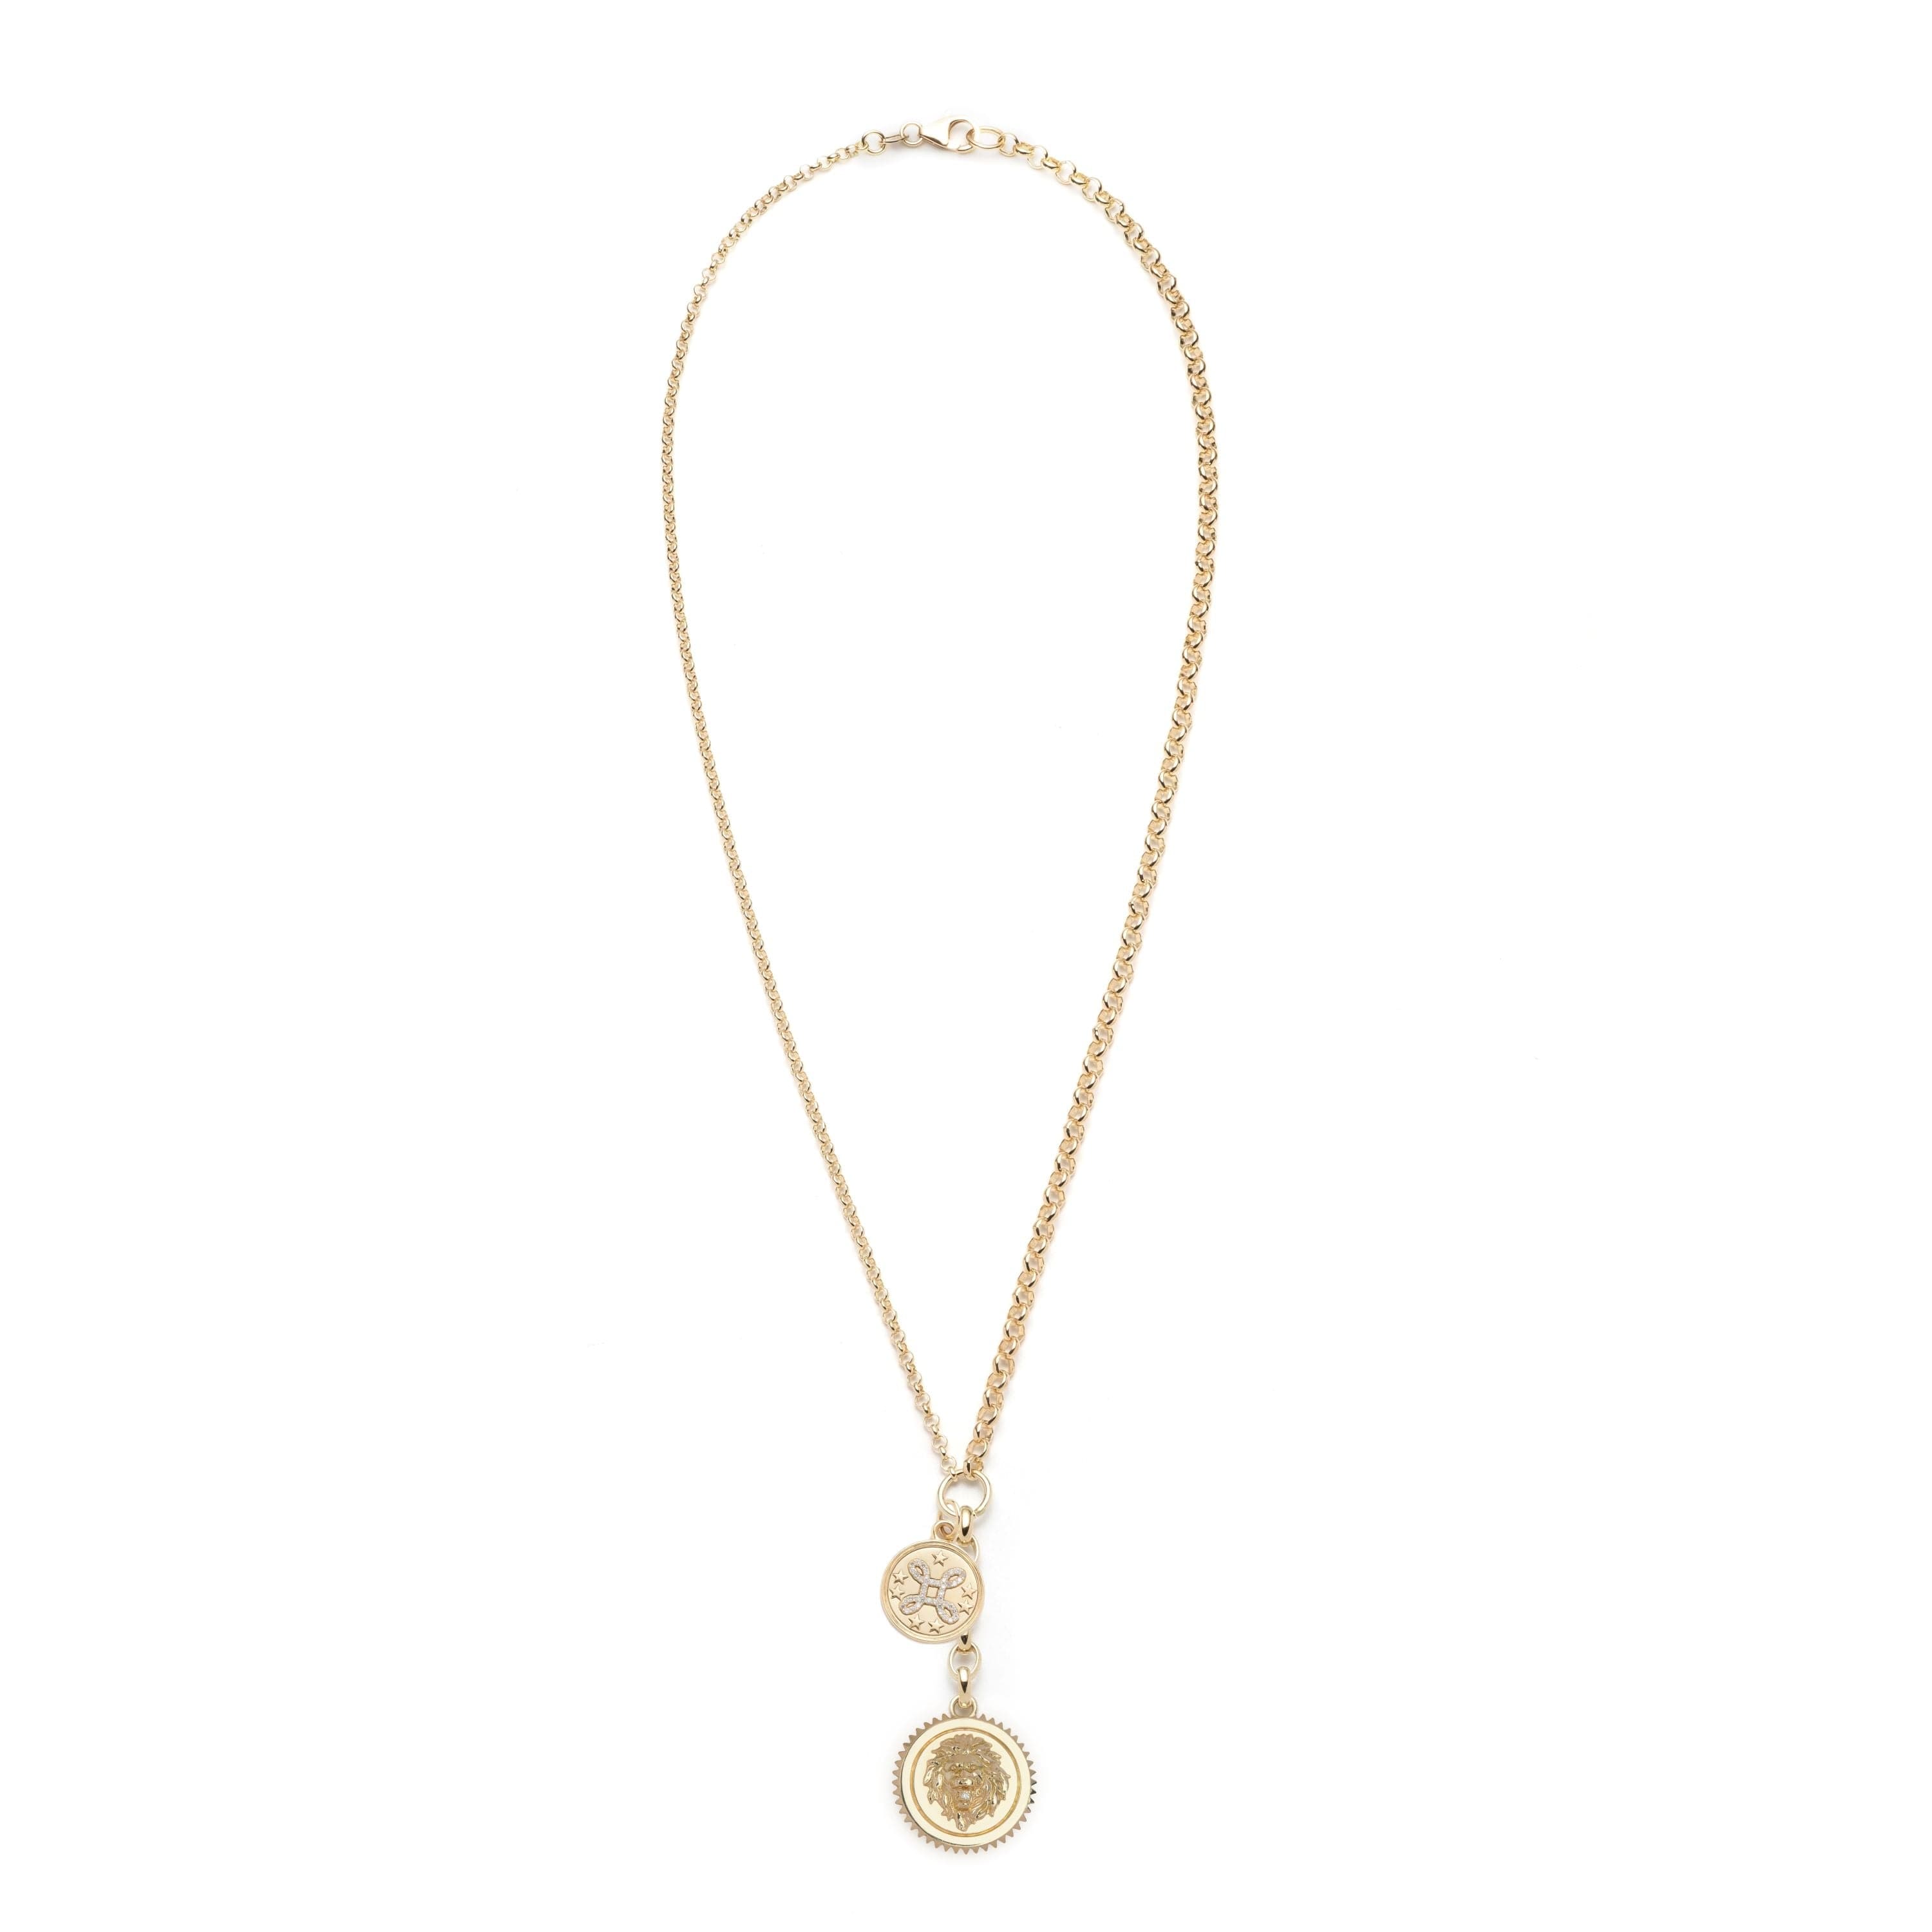 Strength + Love Story : Medium Mixed Belcher Extension Chain Necklace